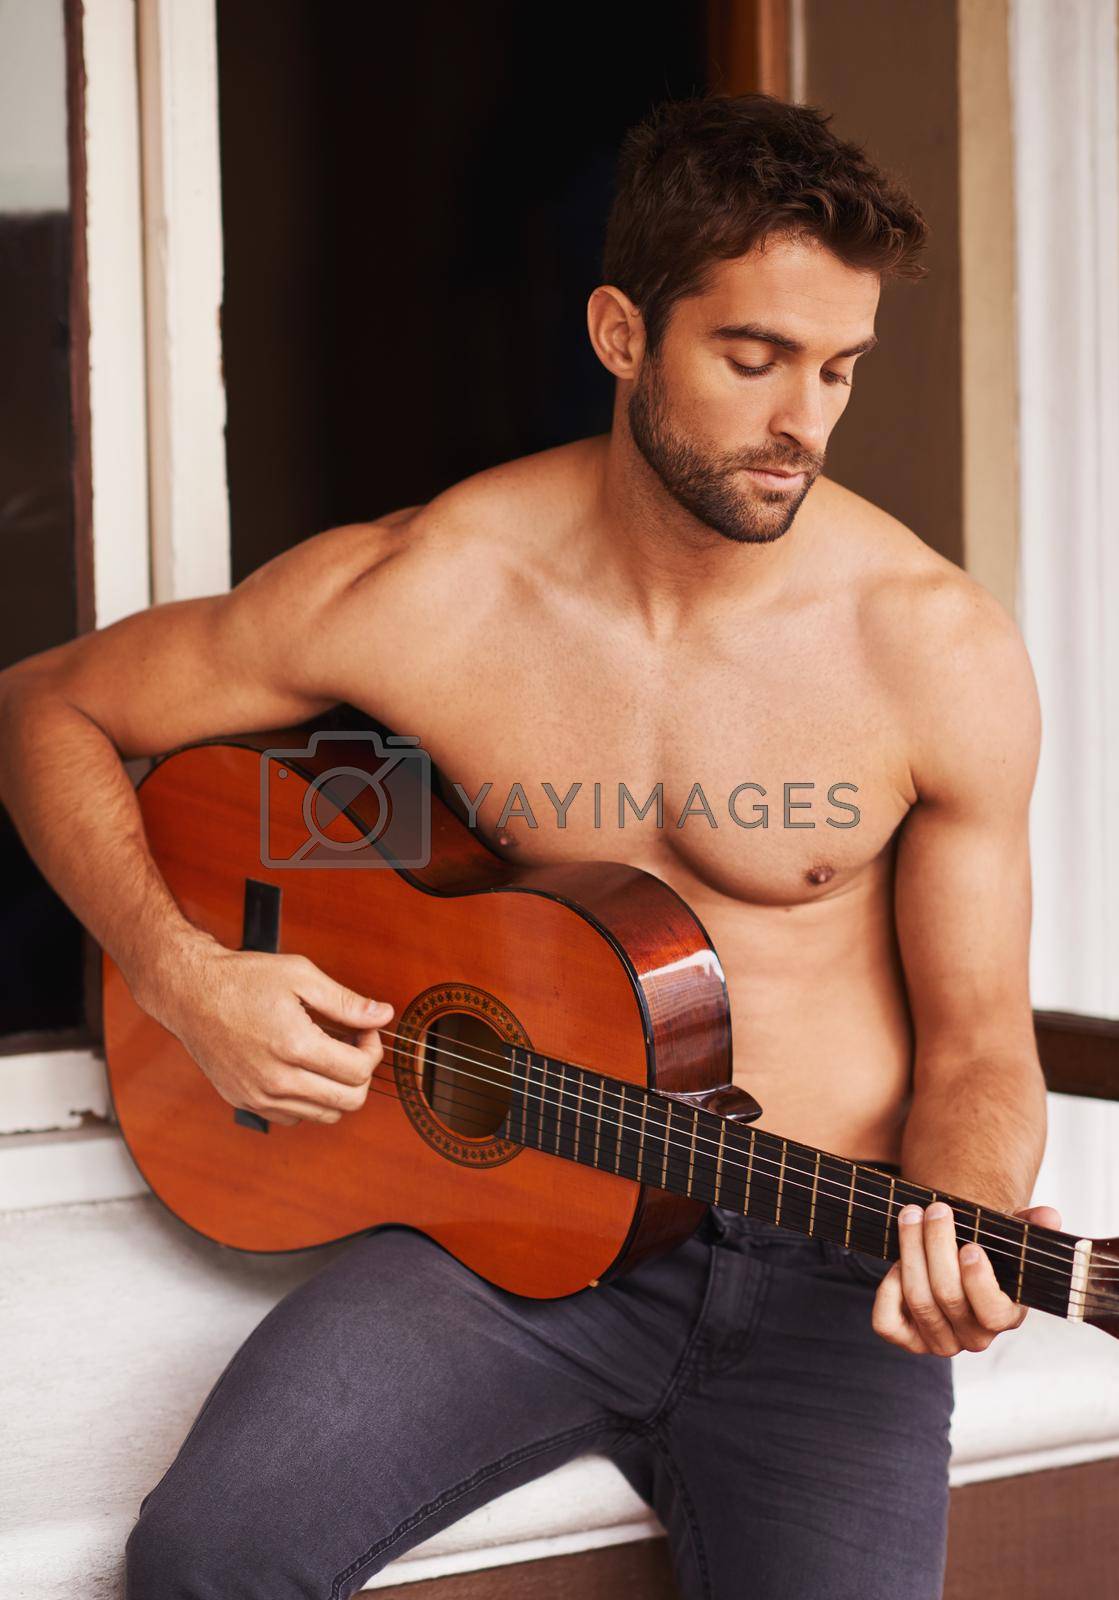 Royalty free image of Playing you a love song. a shirtless young man playing guitar at home. by YuriArcurs